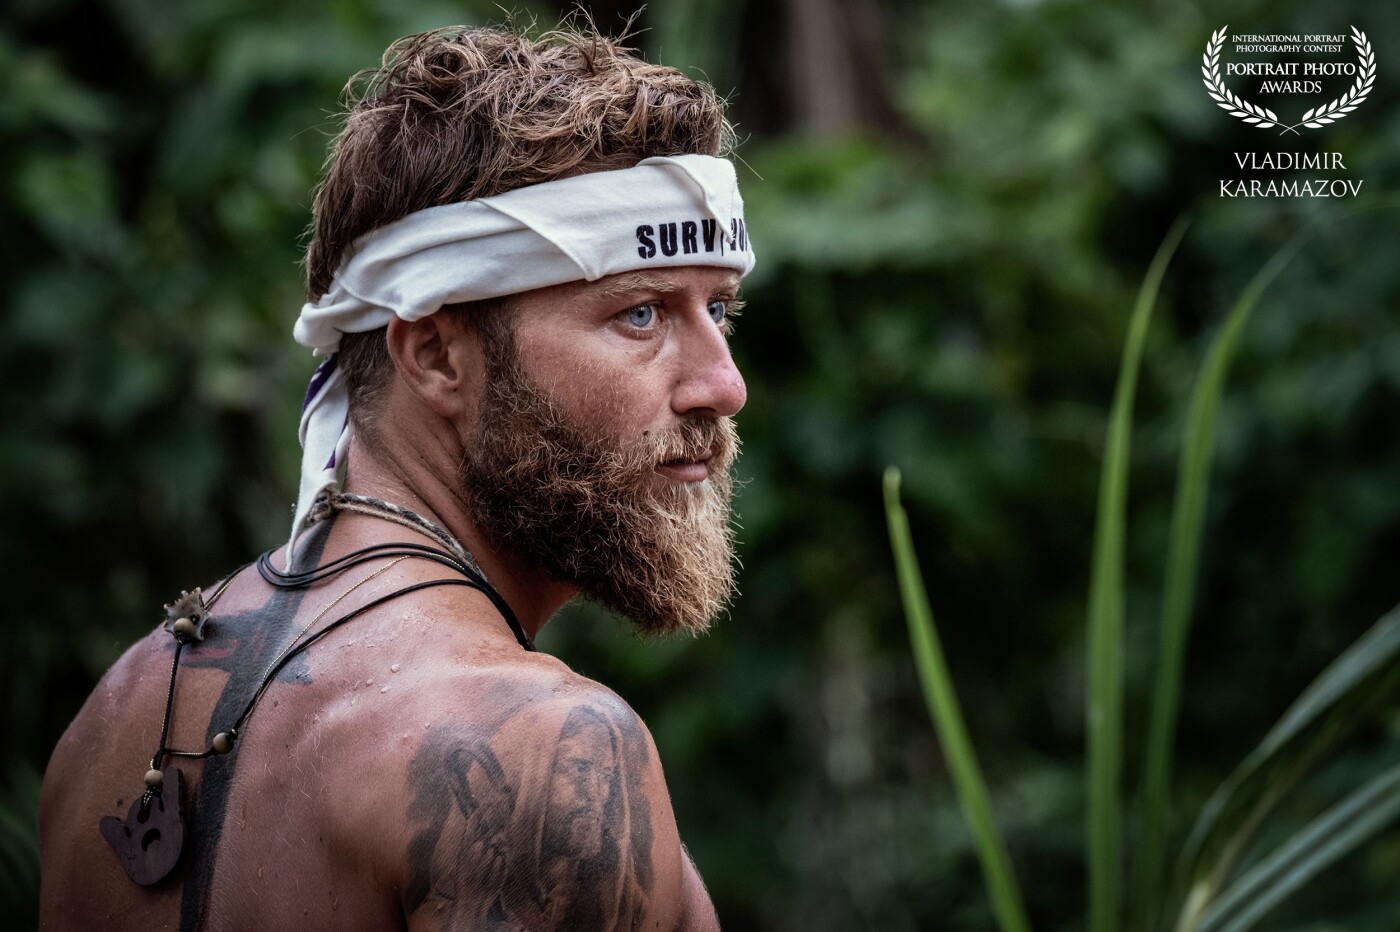 Survivor is the most impressive reality show in the world. It is a test of the human will and a test of whether we could live in the wild without the comforts of the modern world.